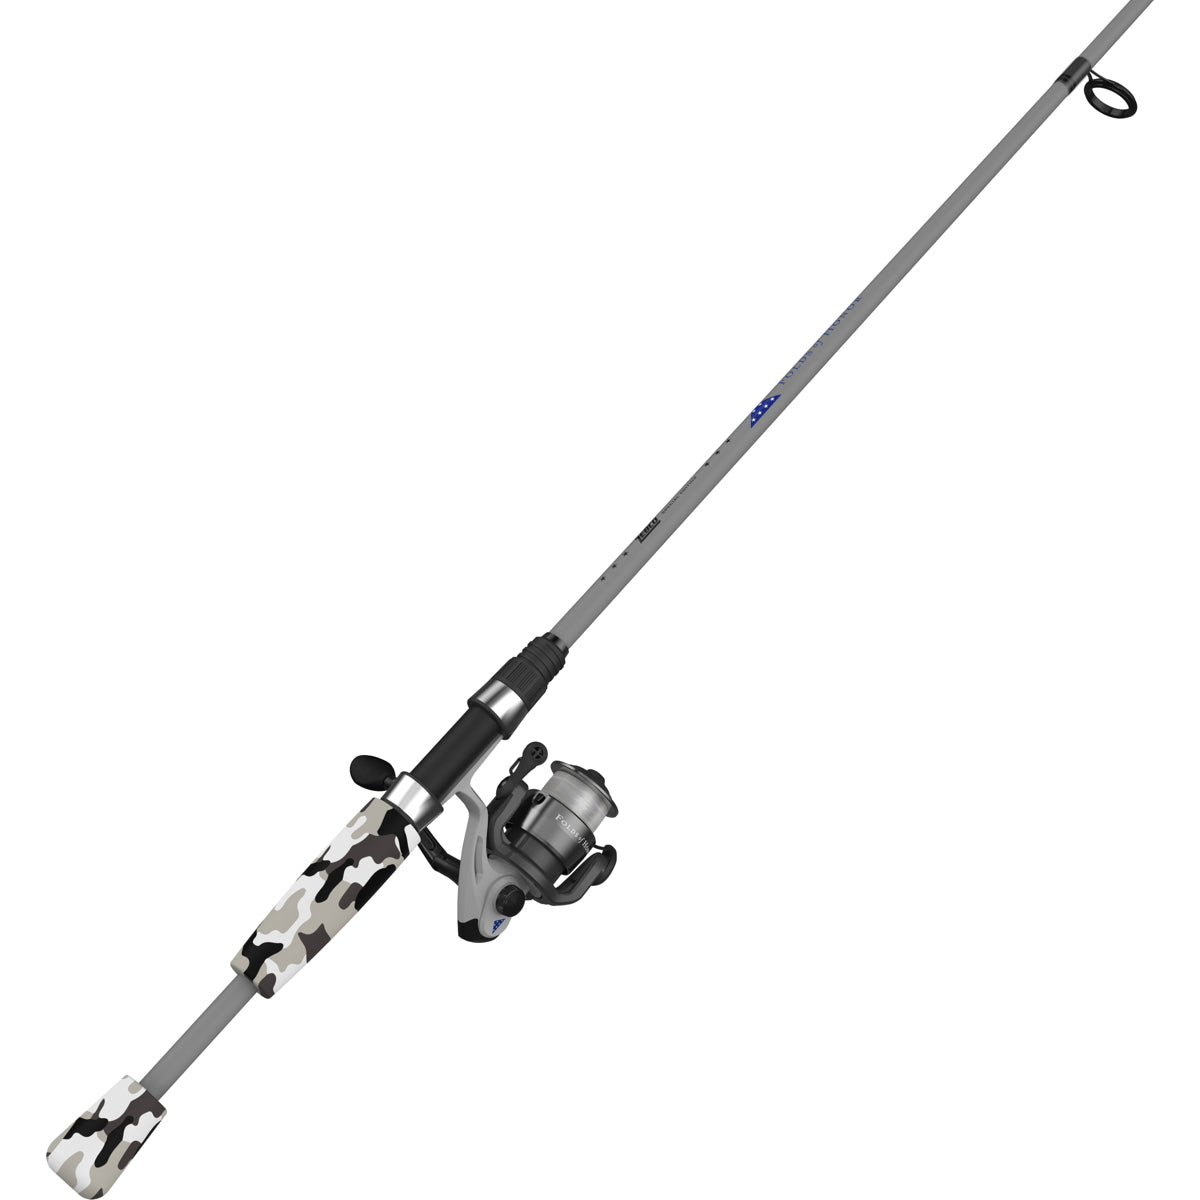 Photo of Zebco Folds of Honor 20SZ/602M Spinning Combo - Camo for sale at United Tackle Shops.